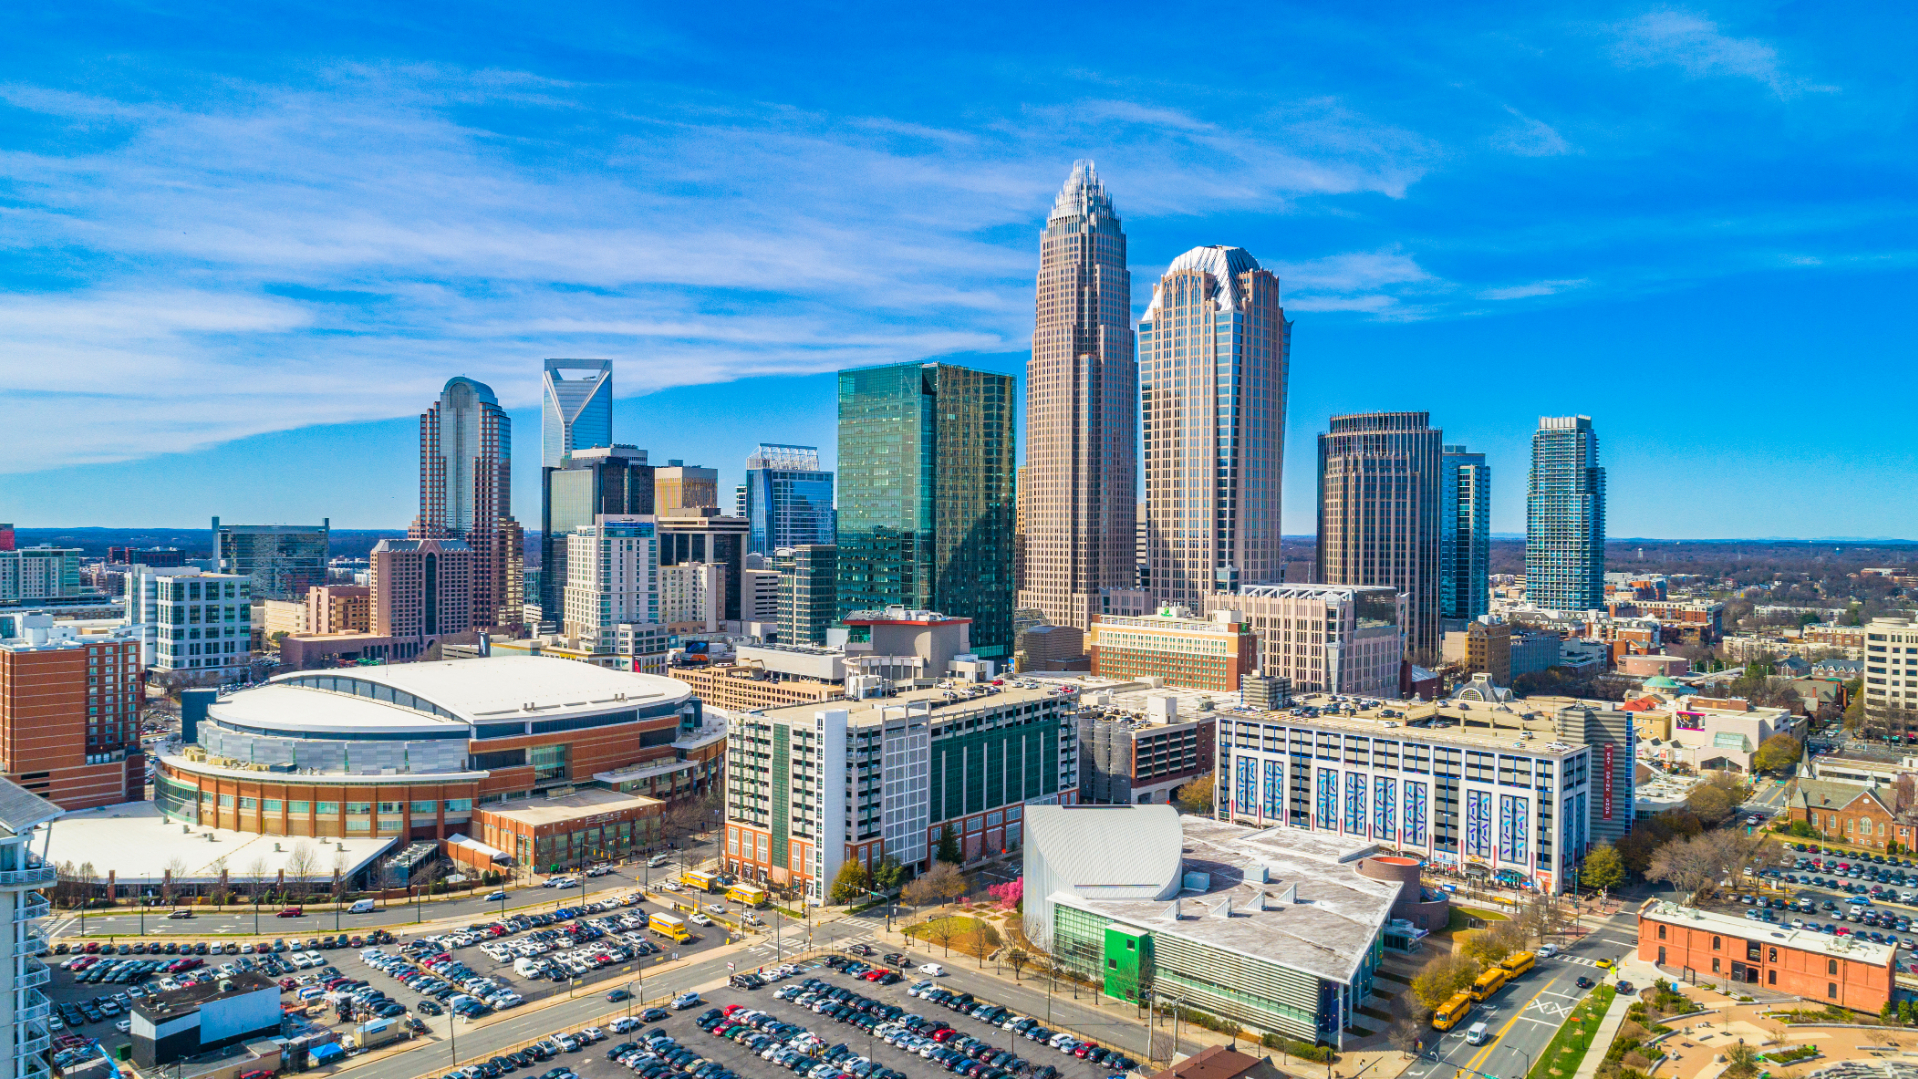 As the leading health providers in the area, we at Atrium Health and Novant Health are dedicated to lending our expertise to help minimize the risk of contracting or spreading COVID-19 for our visitors and for the people who call Charlotte home during this year's Republican National Convention (RNC) in Charlotte.